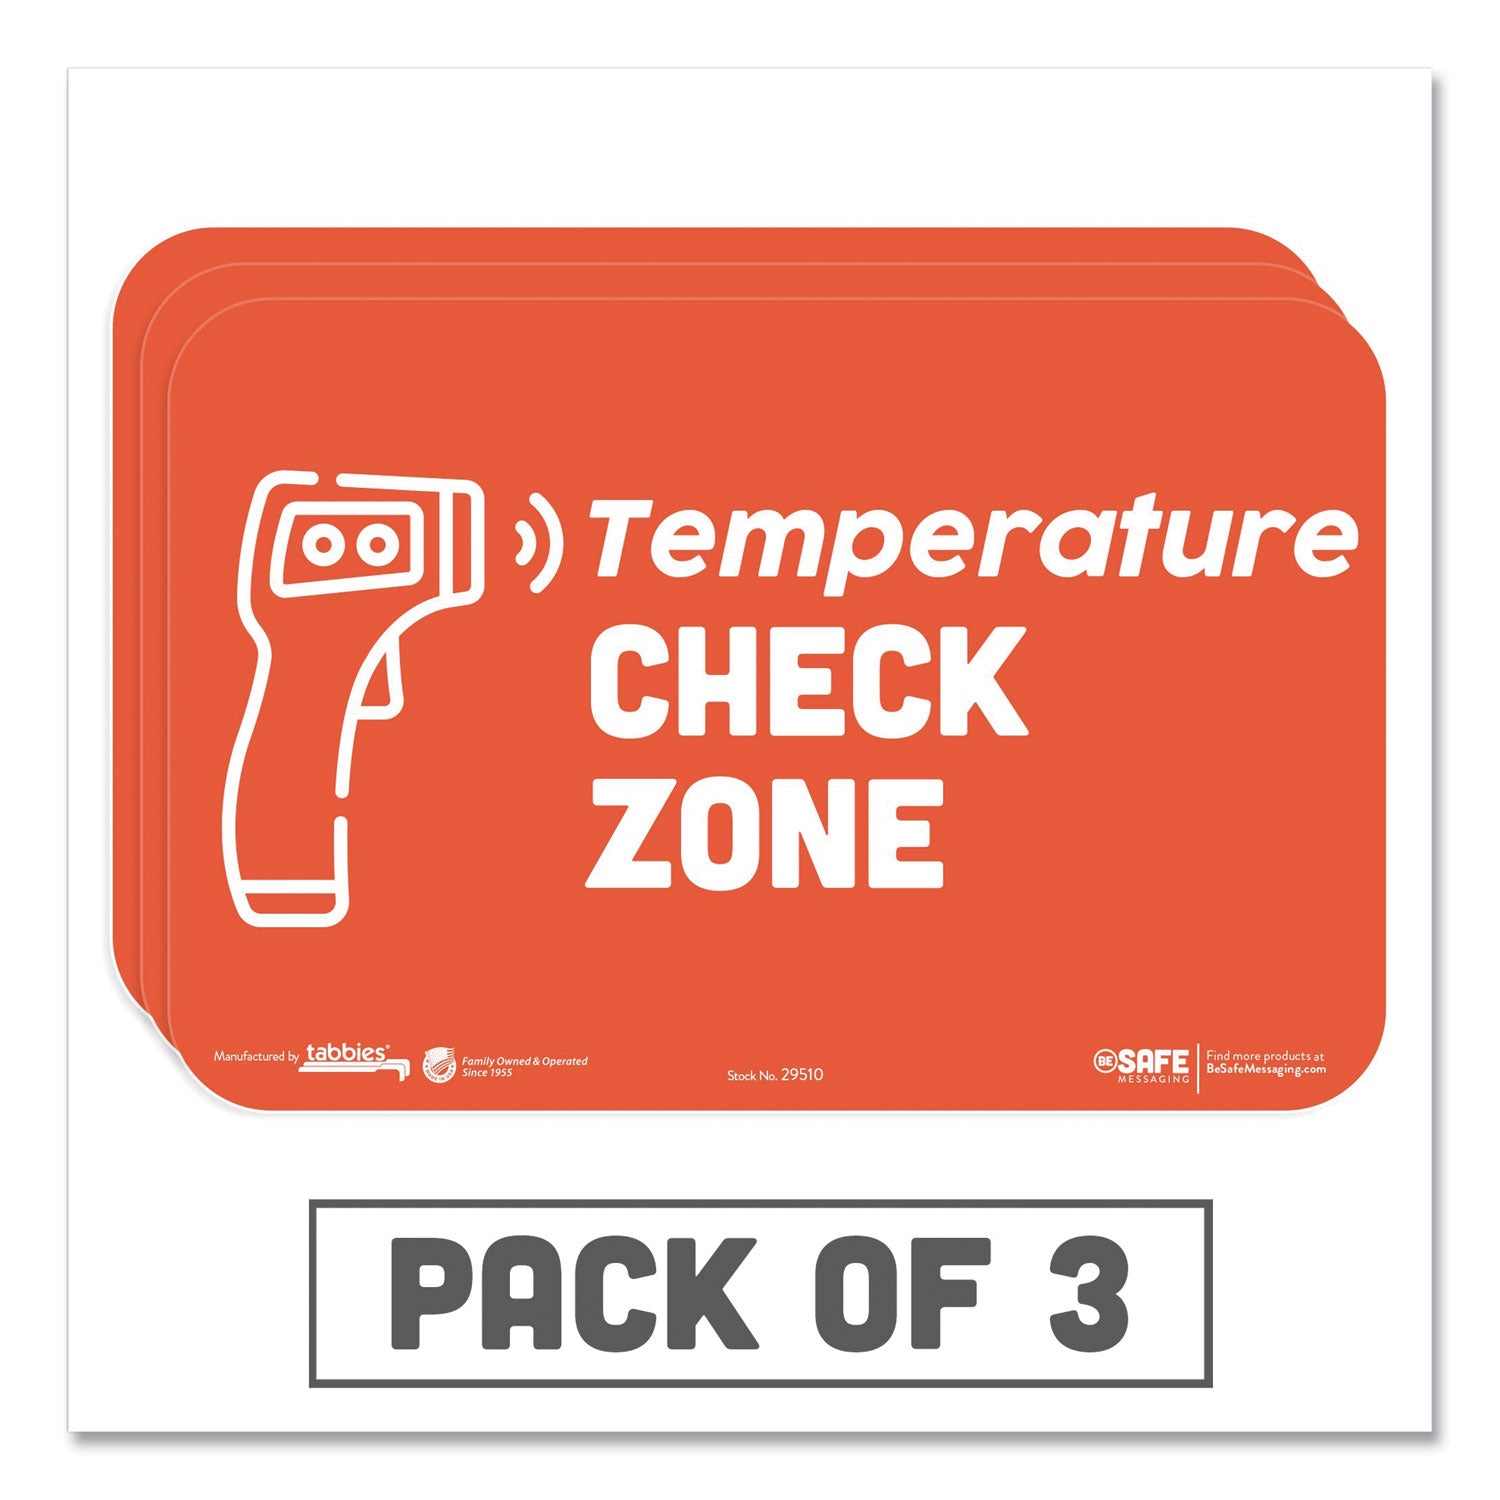 besafe-messaging-education-wall-signs-9-x-6-temperature-check-zone-3-pack_tab29510 - 1